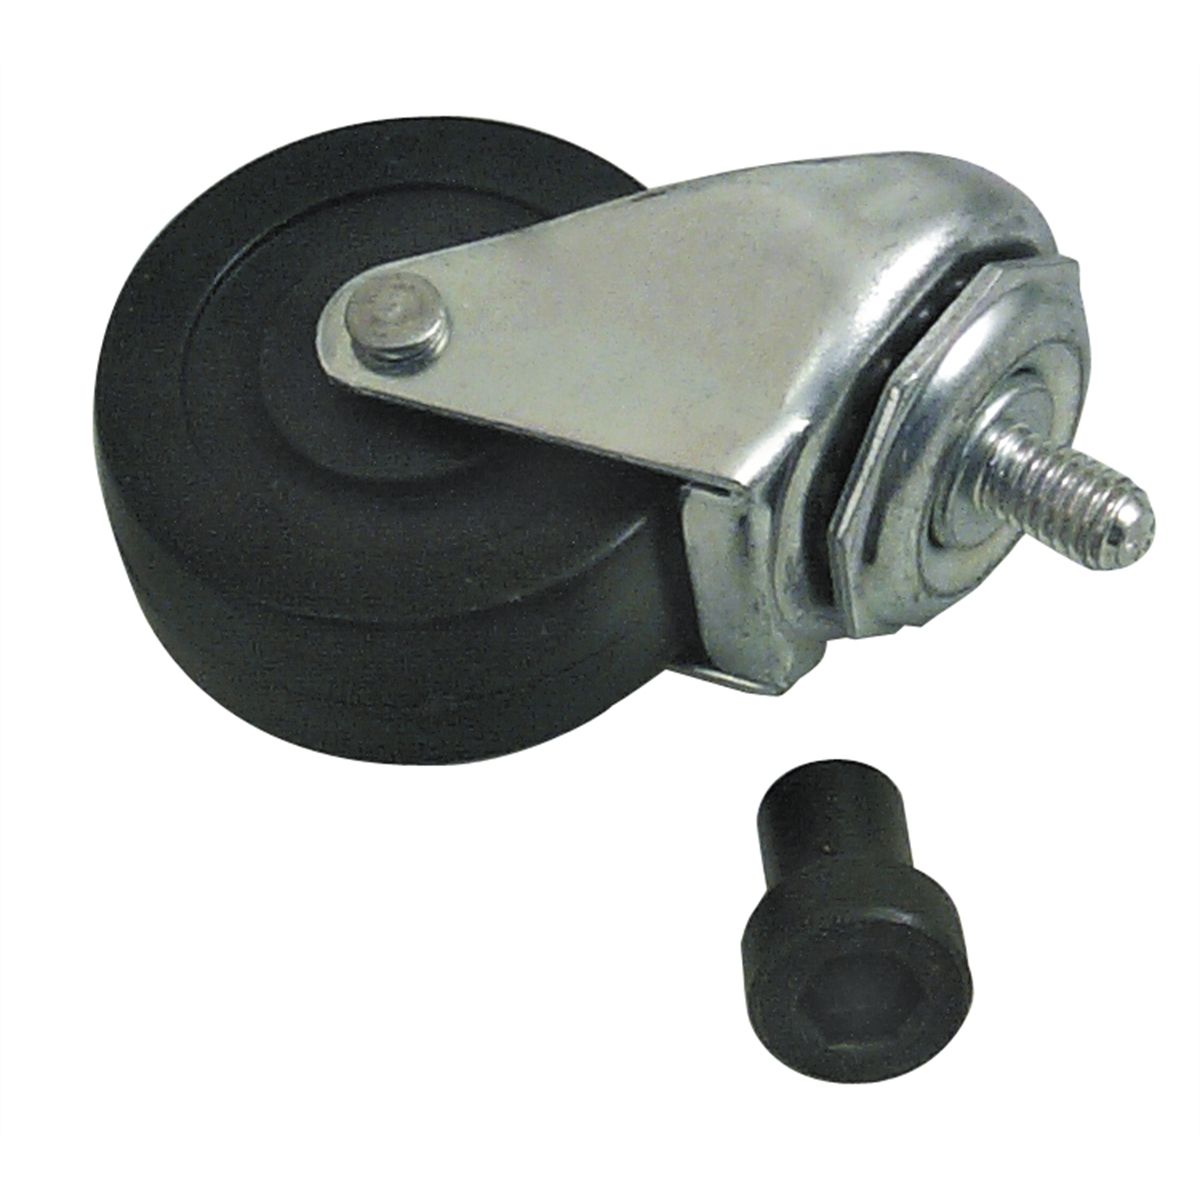 2 In Replacement Wheel For Lisle Plastic Creeper